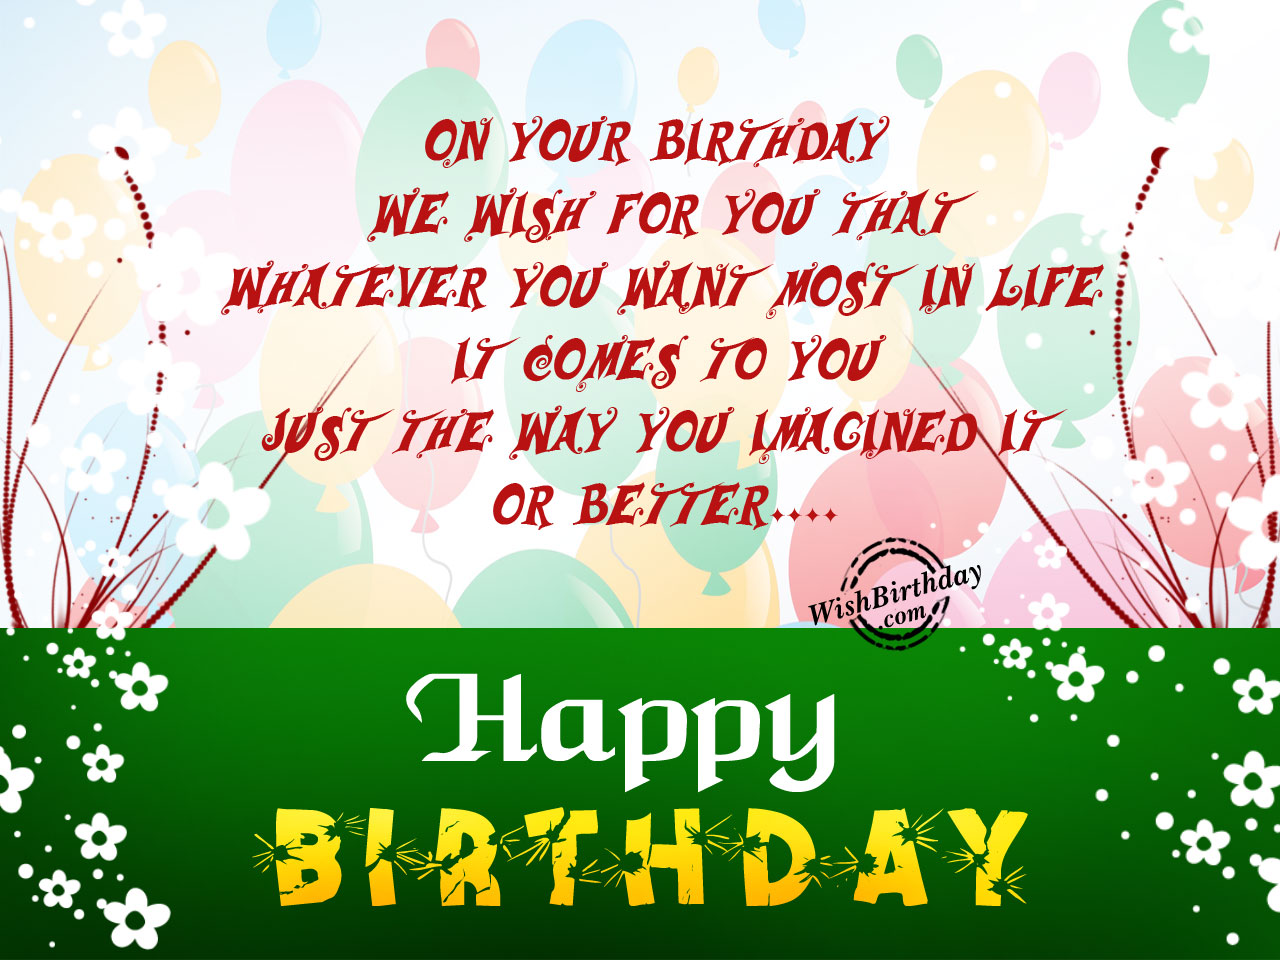 Birthday Wishes With Quotes - Birthday Wishes, Happy Birthday Pictures